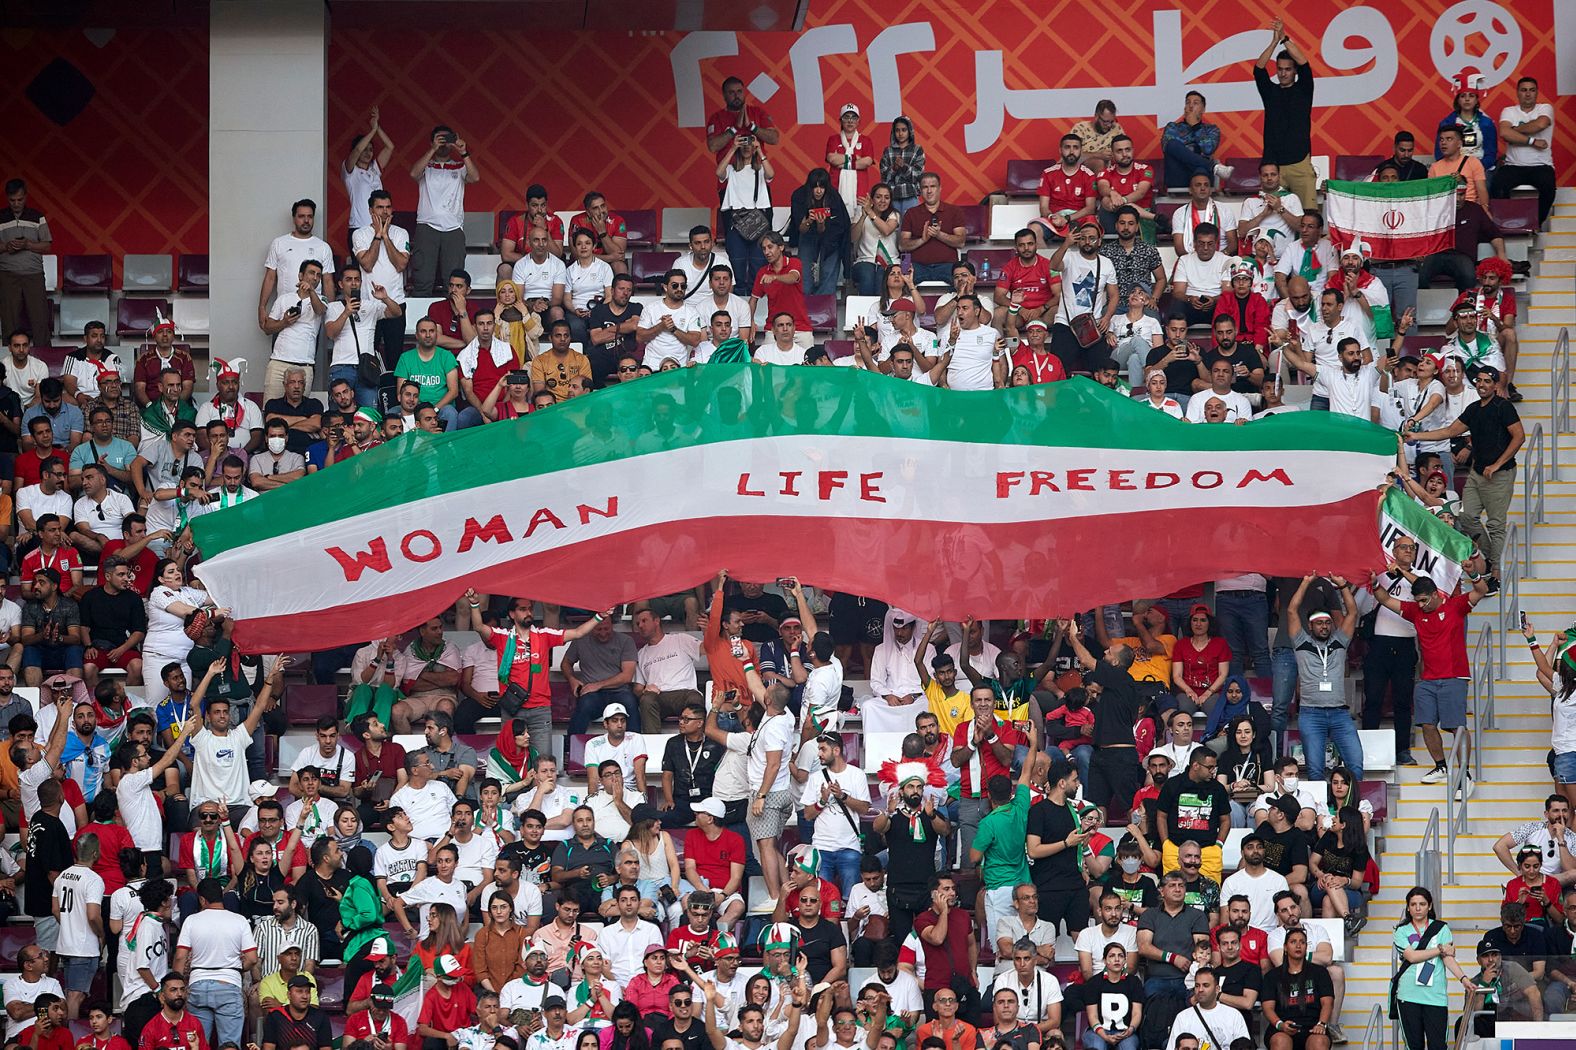 Iranian fans hold up a sign that reads "Woman Life Freedom" during the match against England. Anti-government protests have entered a third month back in Iran. Outside the stadium before the game, CNN witnessed a number of Iran supporters <a href="index.php?page=&url=https%3A%2F%2Fwww.cnn.com%2Fsport%2Flive-news%2Fworld-cup-11-21-22%2Fh_64af1374bbf15fe3487b65c05d1b99b1" target="_blank">wearing protest T-shirts</a>, with slogans such as "Free Iran" or "Rise with the women of Iran."